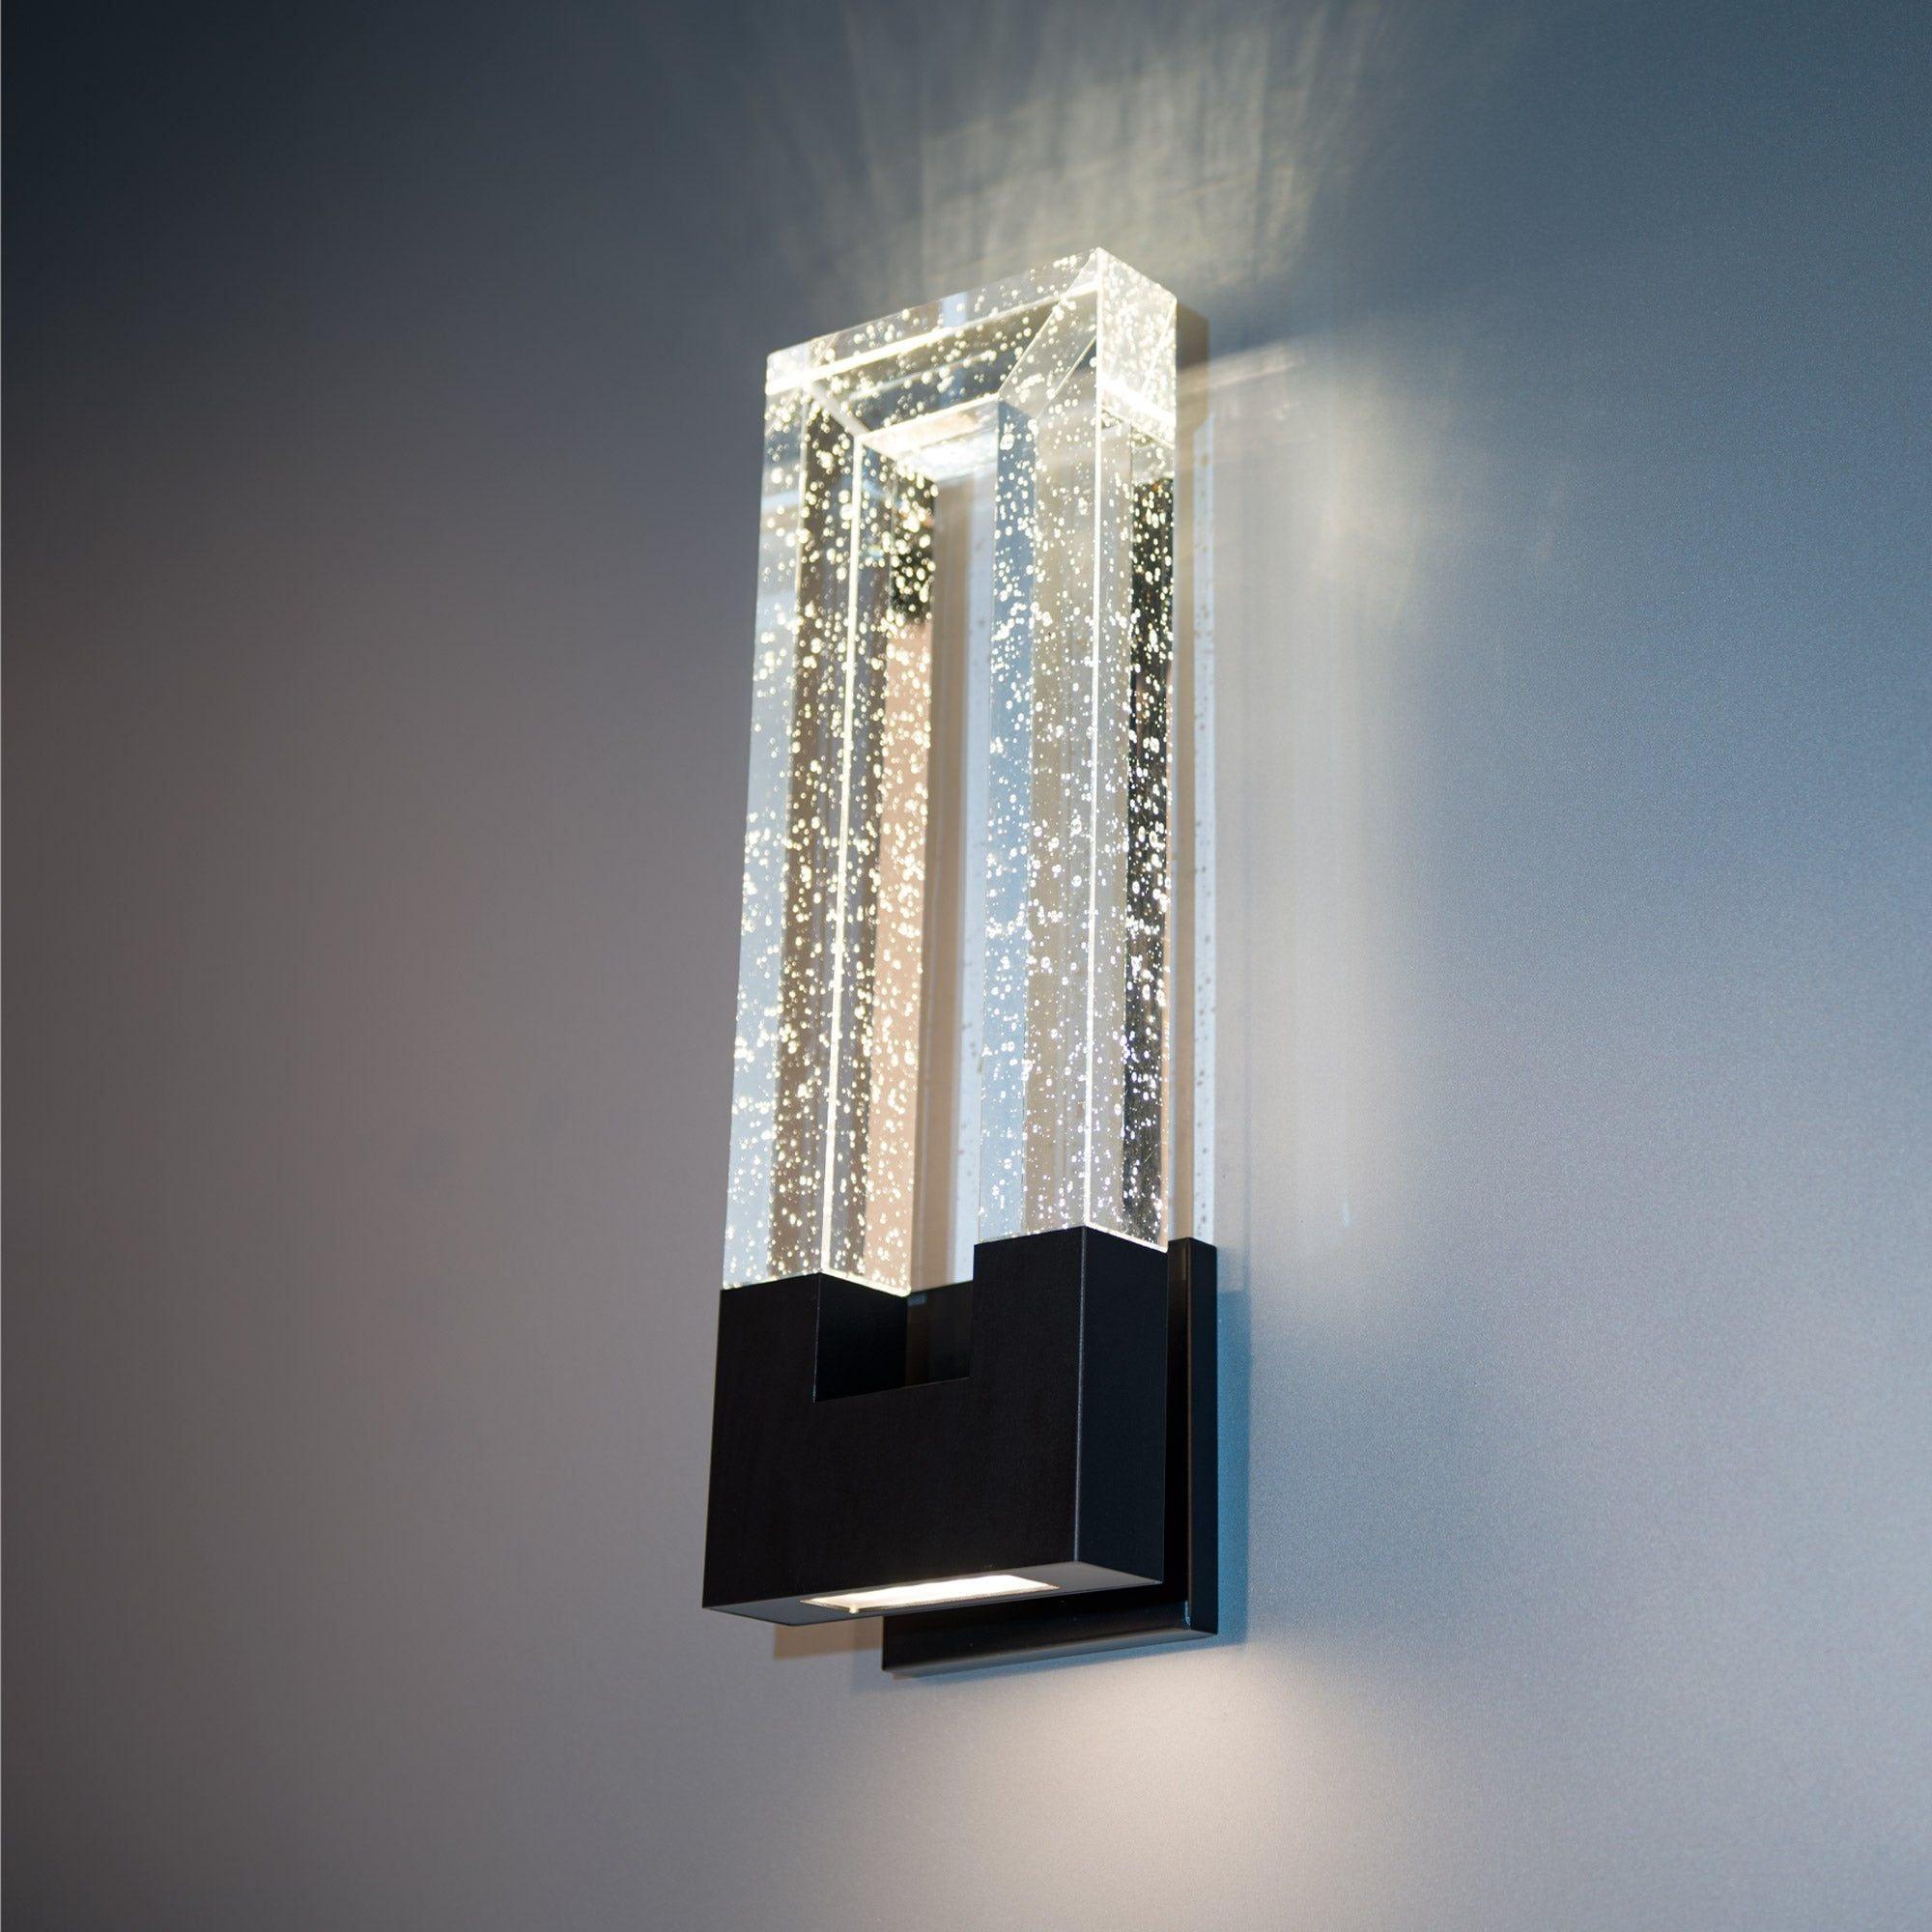 Modern Forms - Chill LED Wall Sconce - Lights Canada